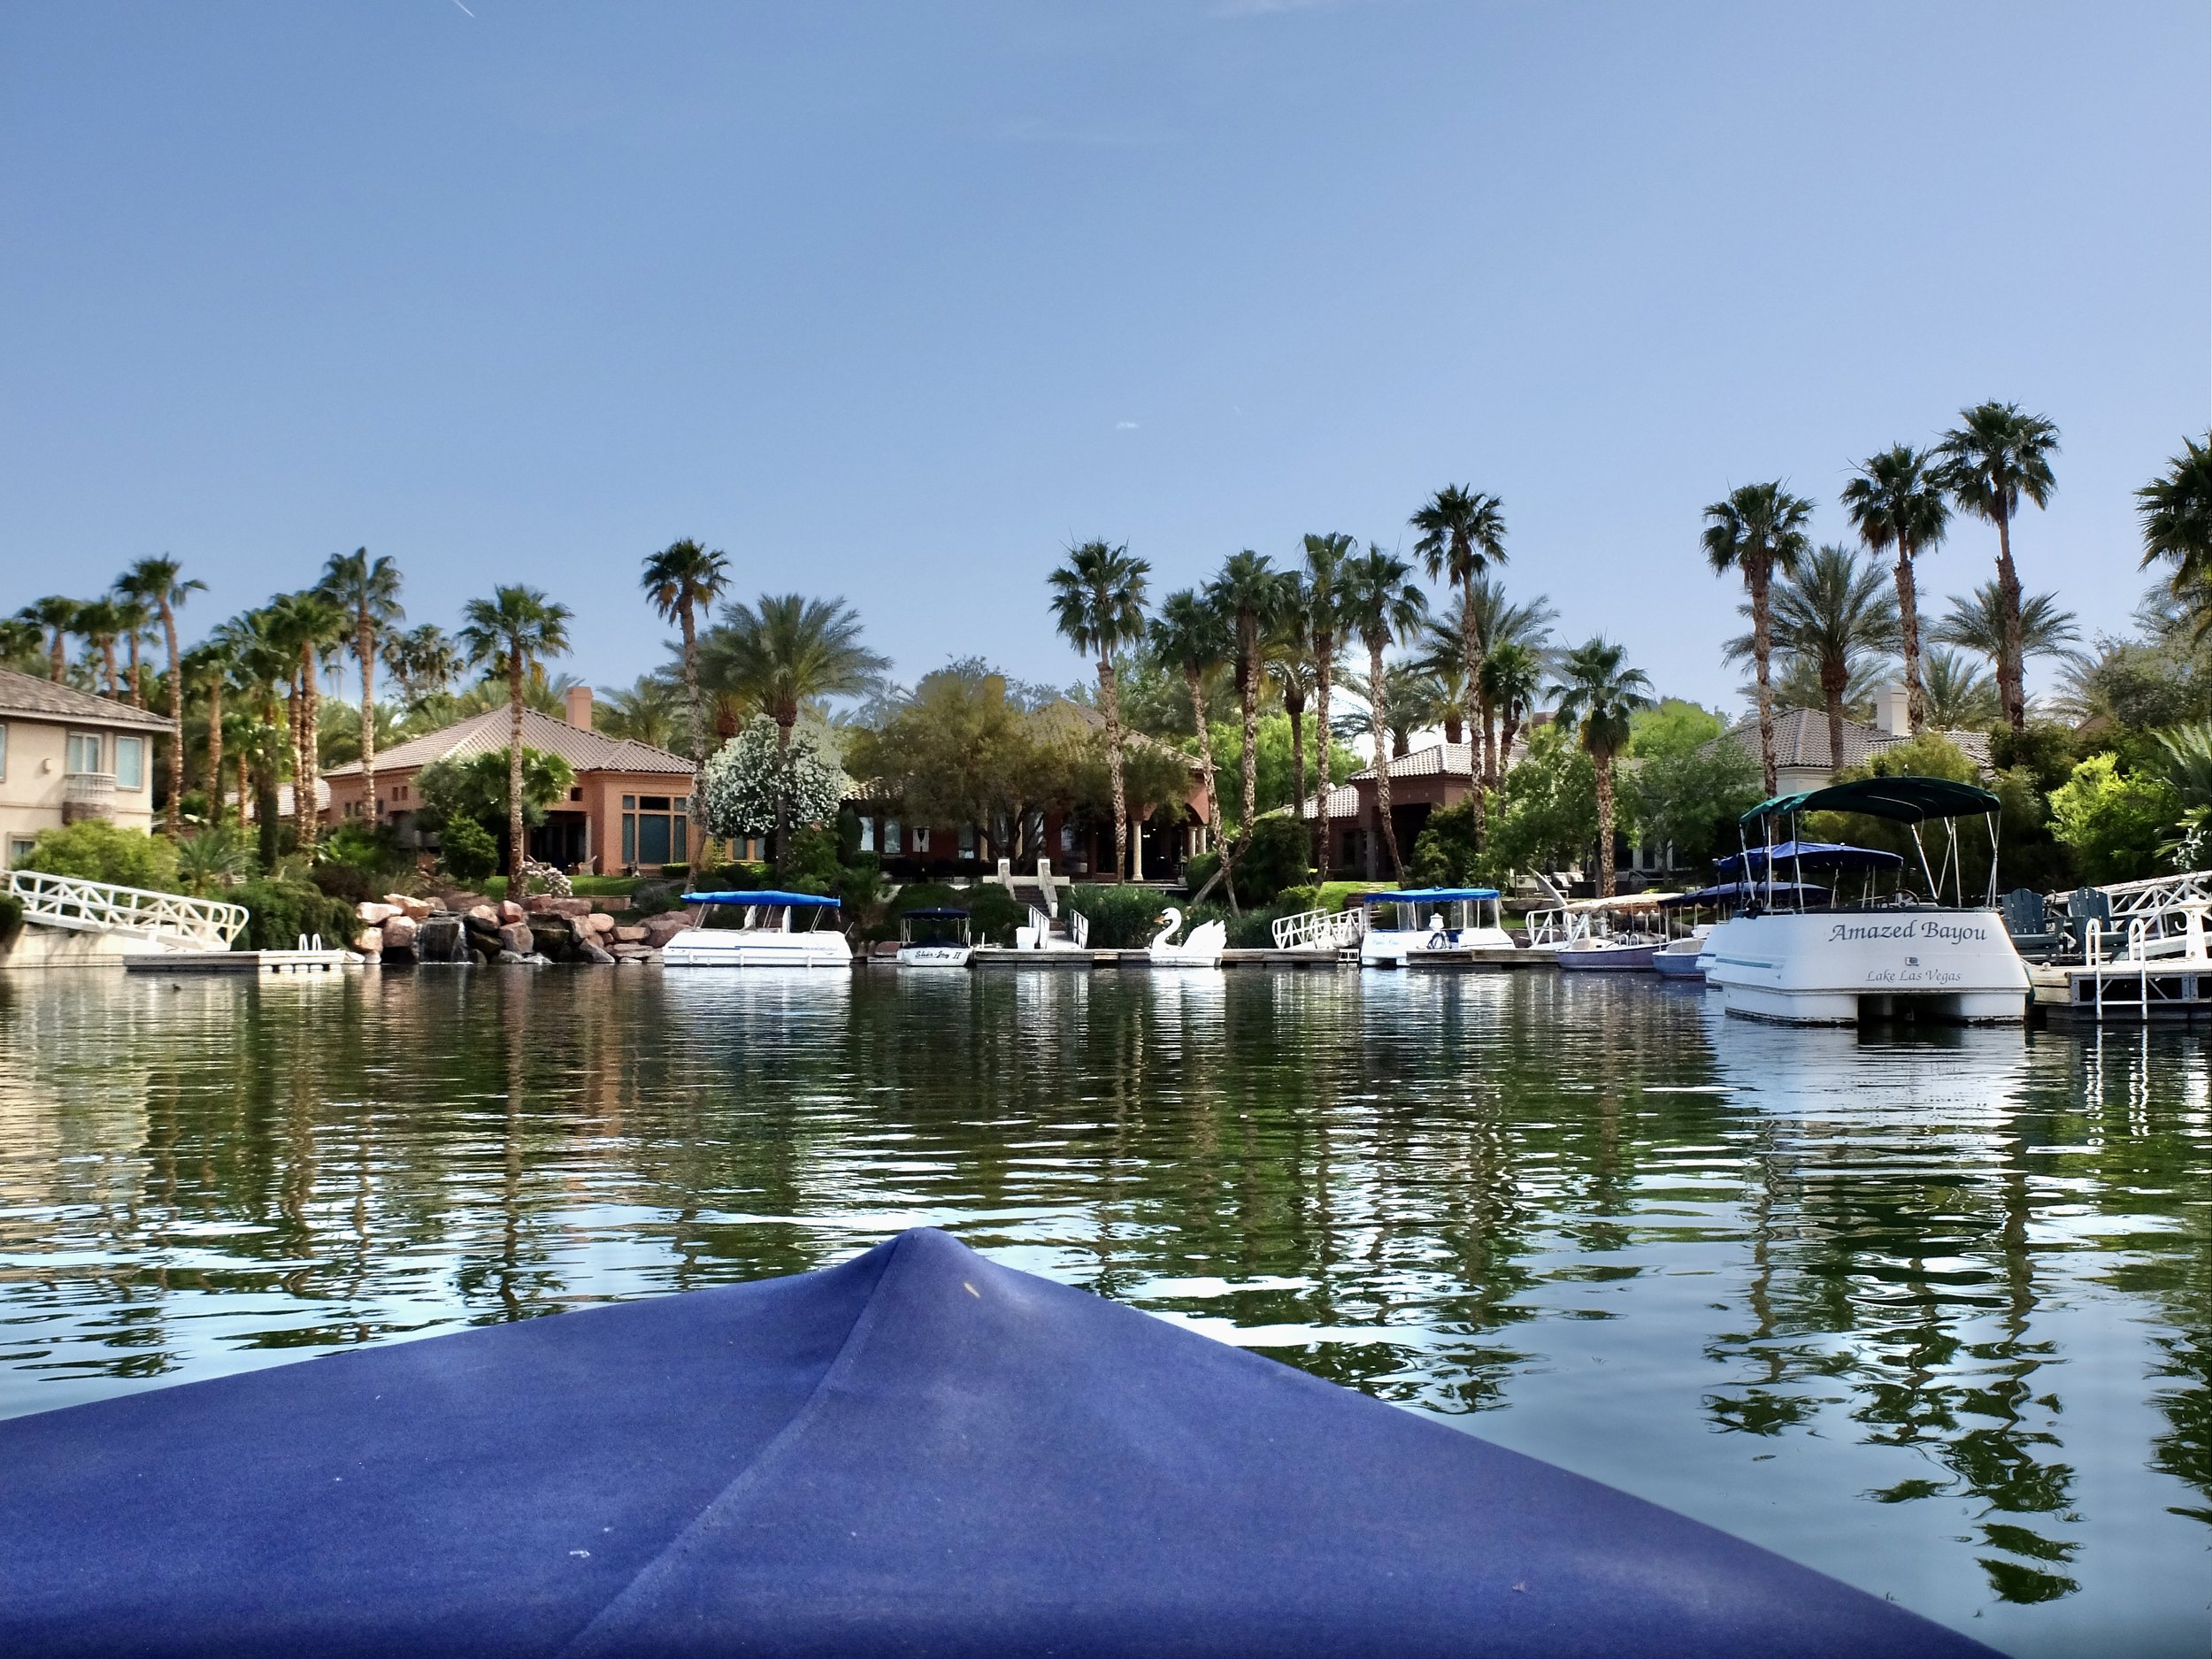  It is Lake Las Vegas so there are watercraft.  They are electric. 